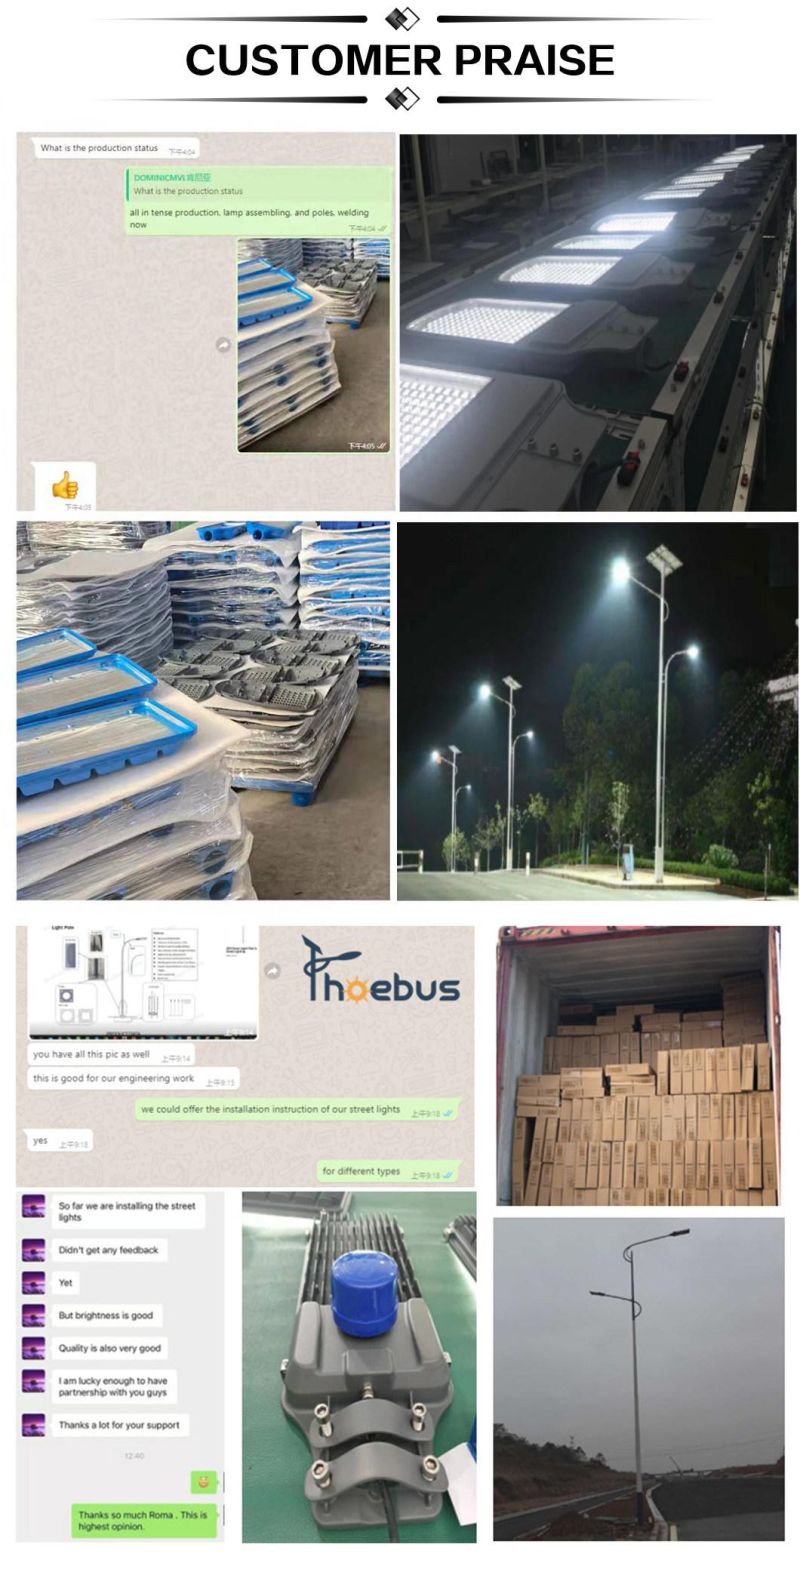 Famous Brand Chip Ultra Bright LED Lamp Outdoor Economic LED Light 30W